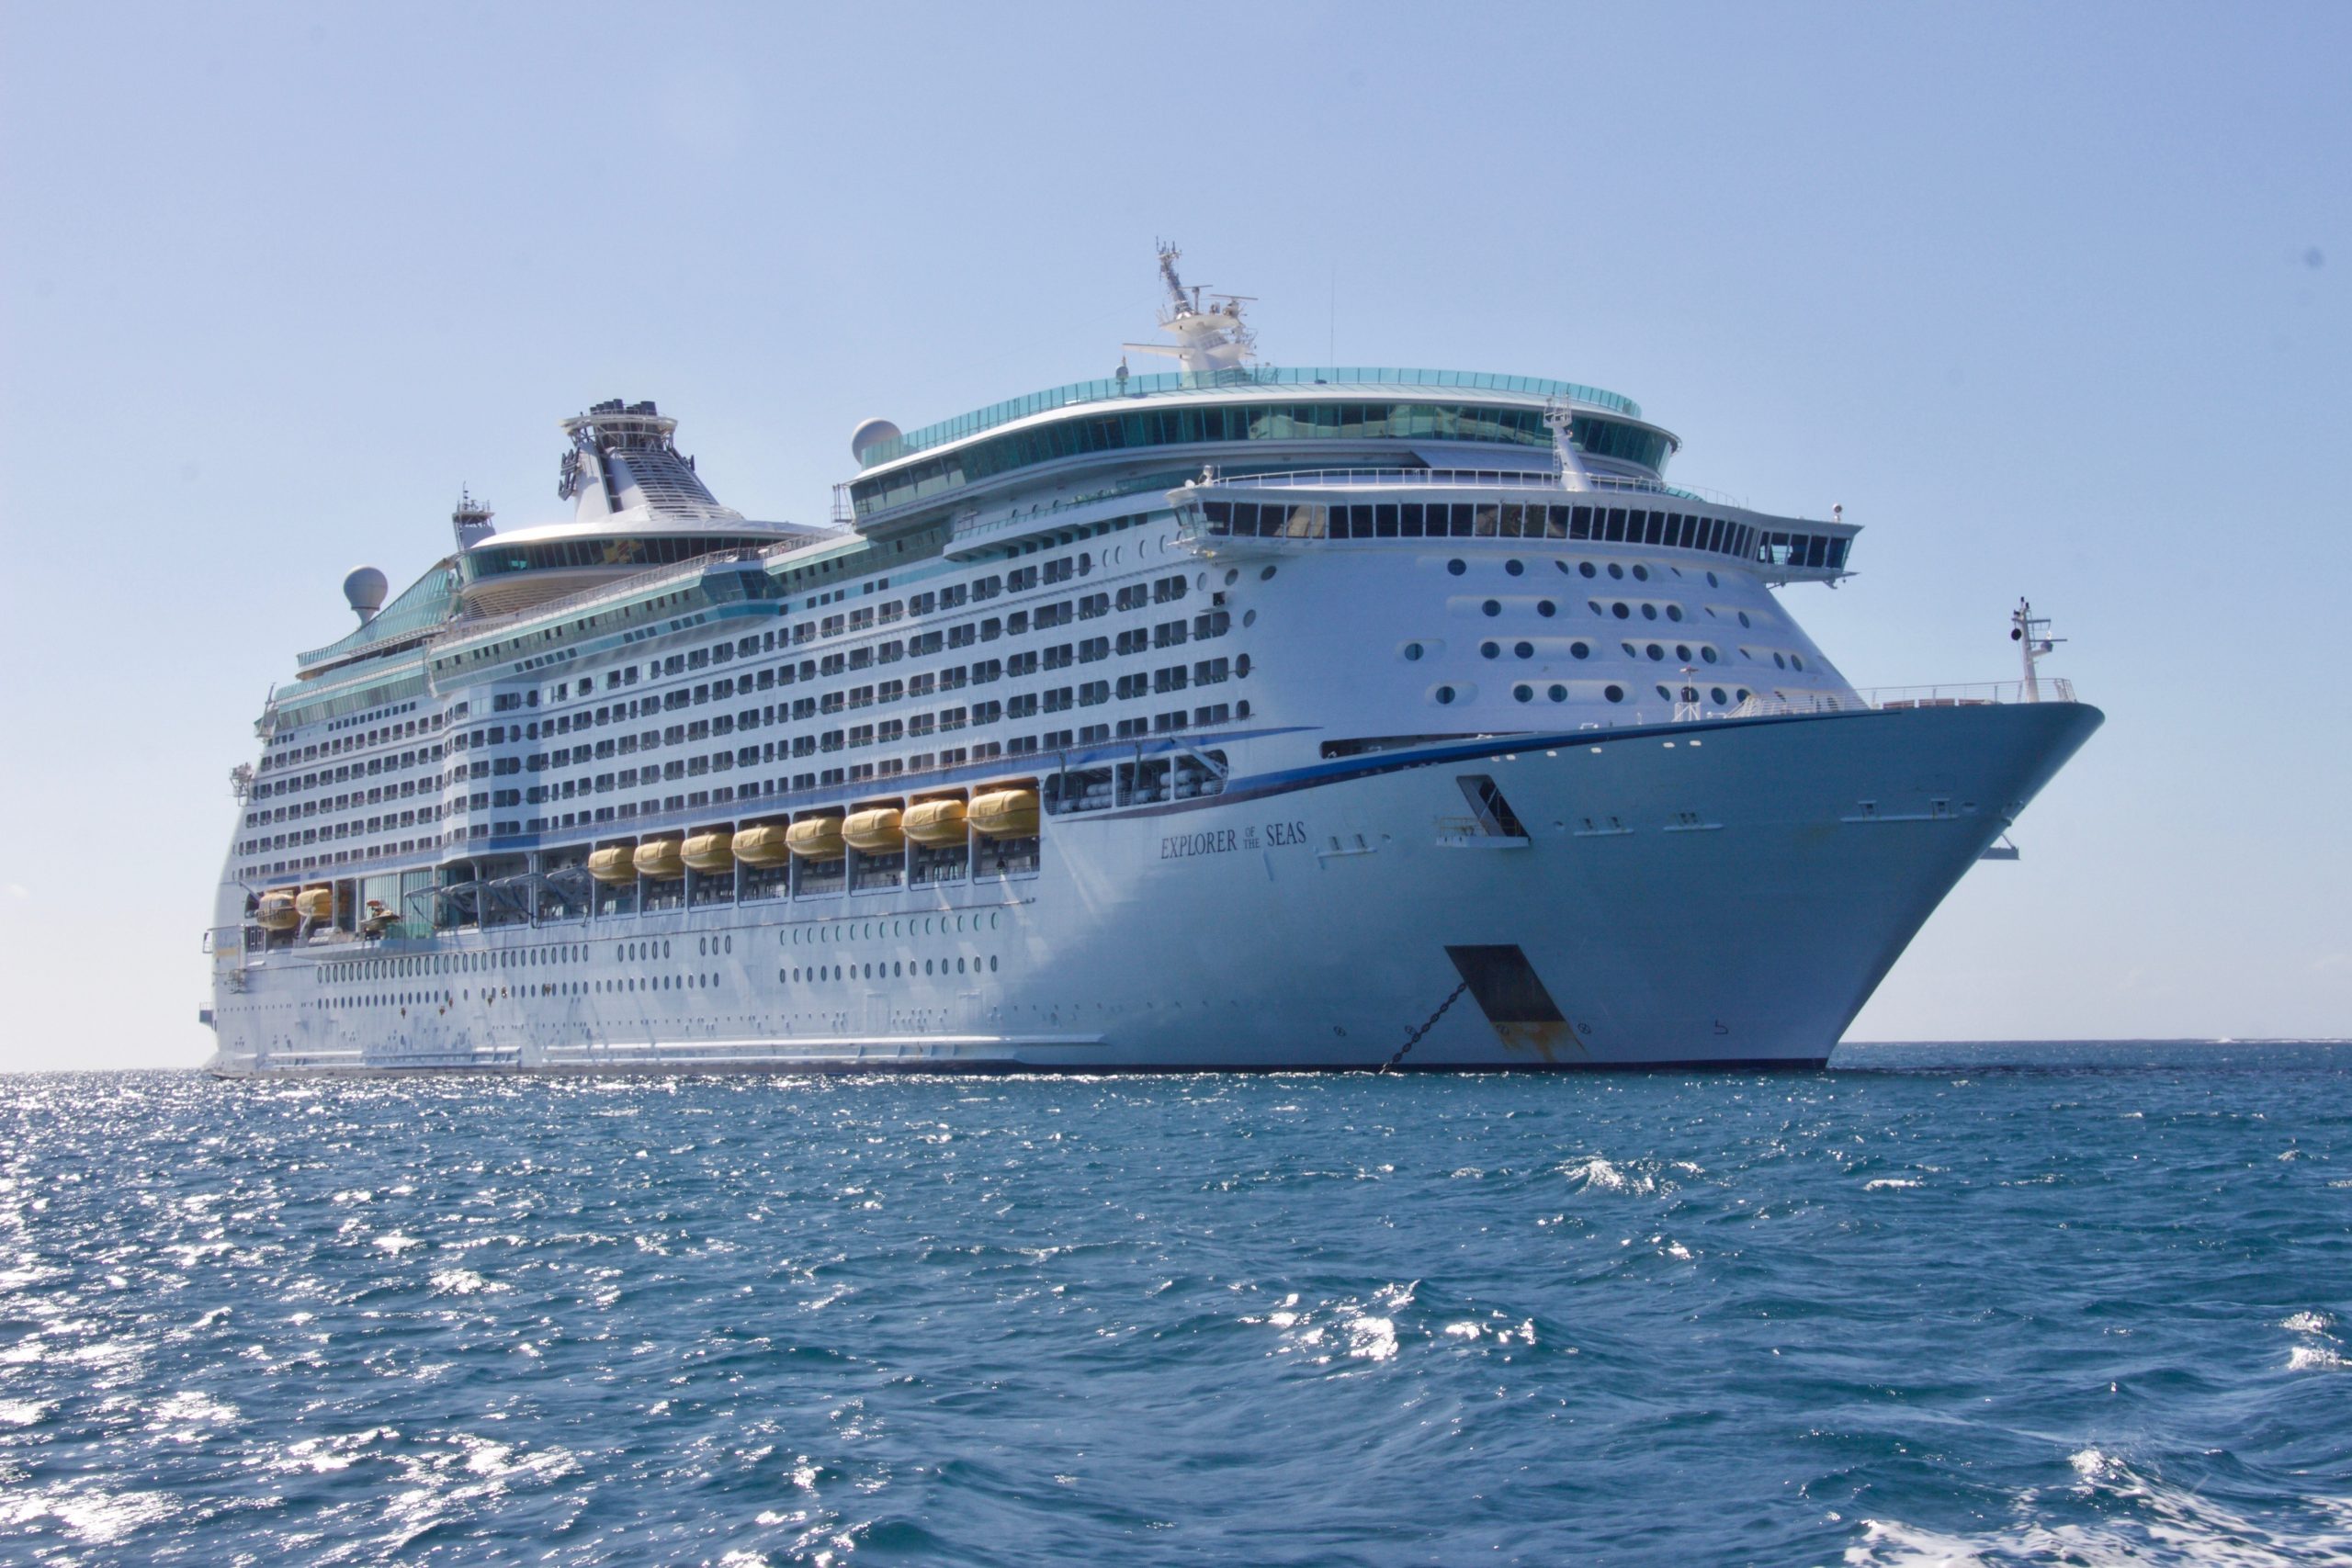 Cruise Vacations: Travel Agent or Book Direct?